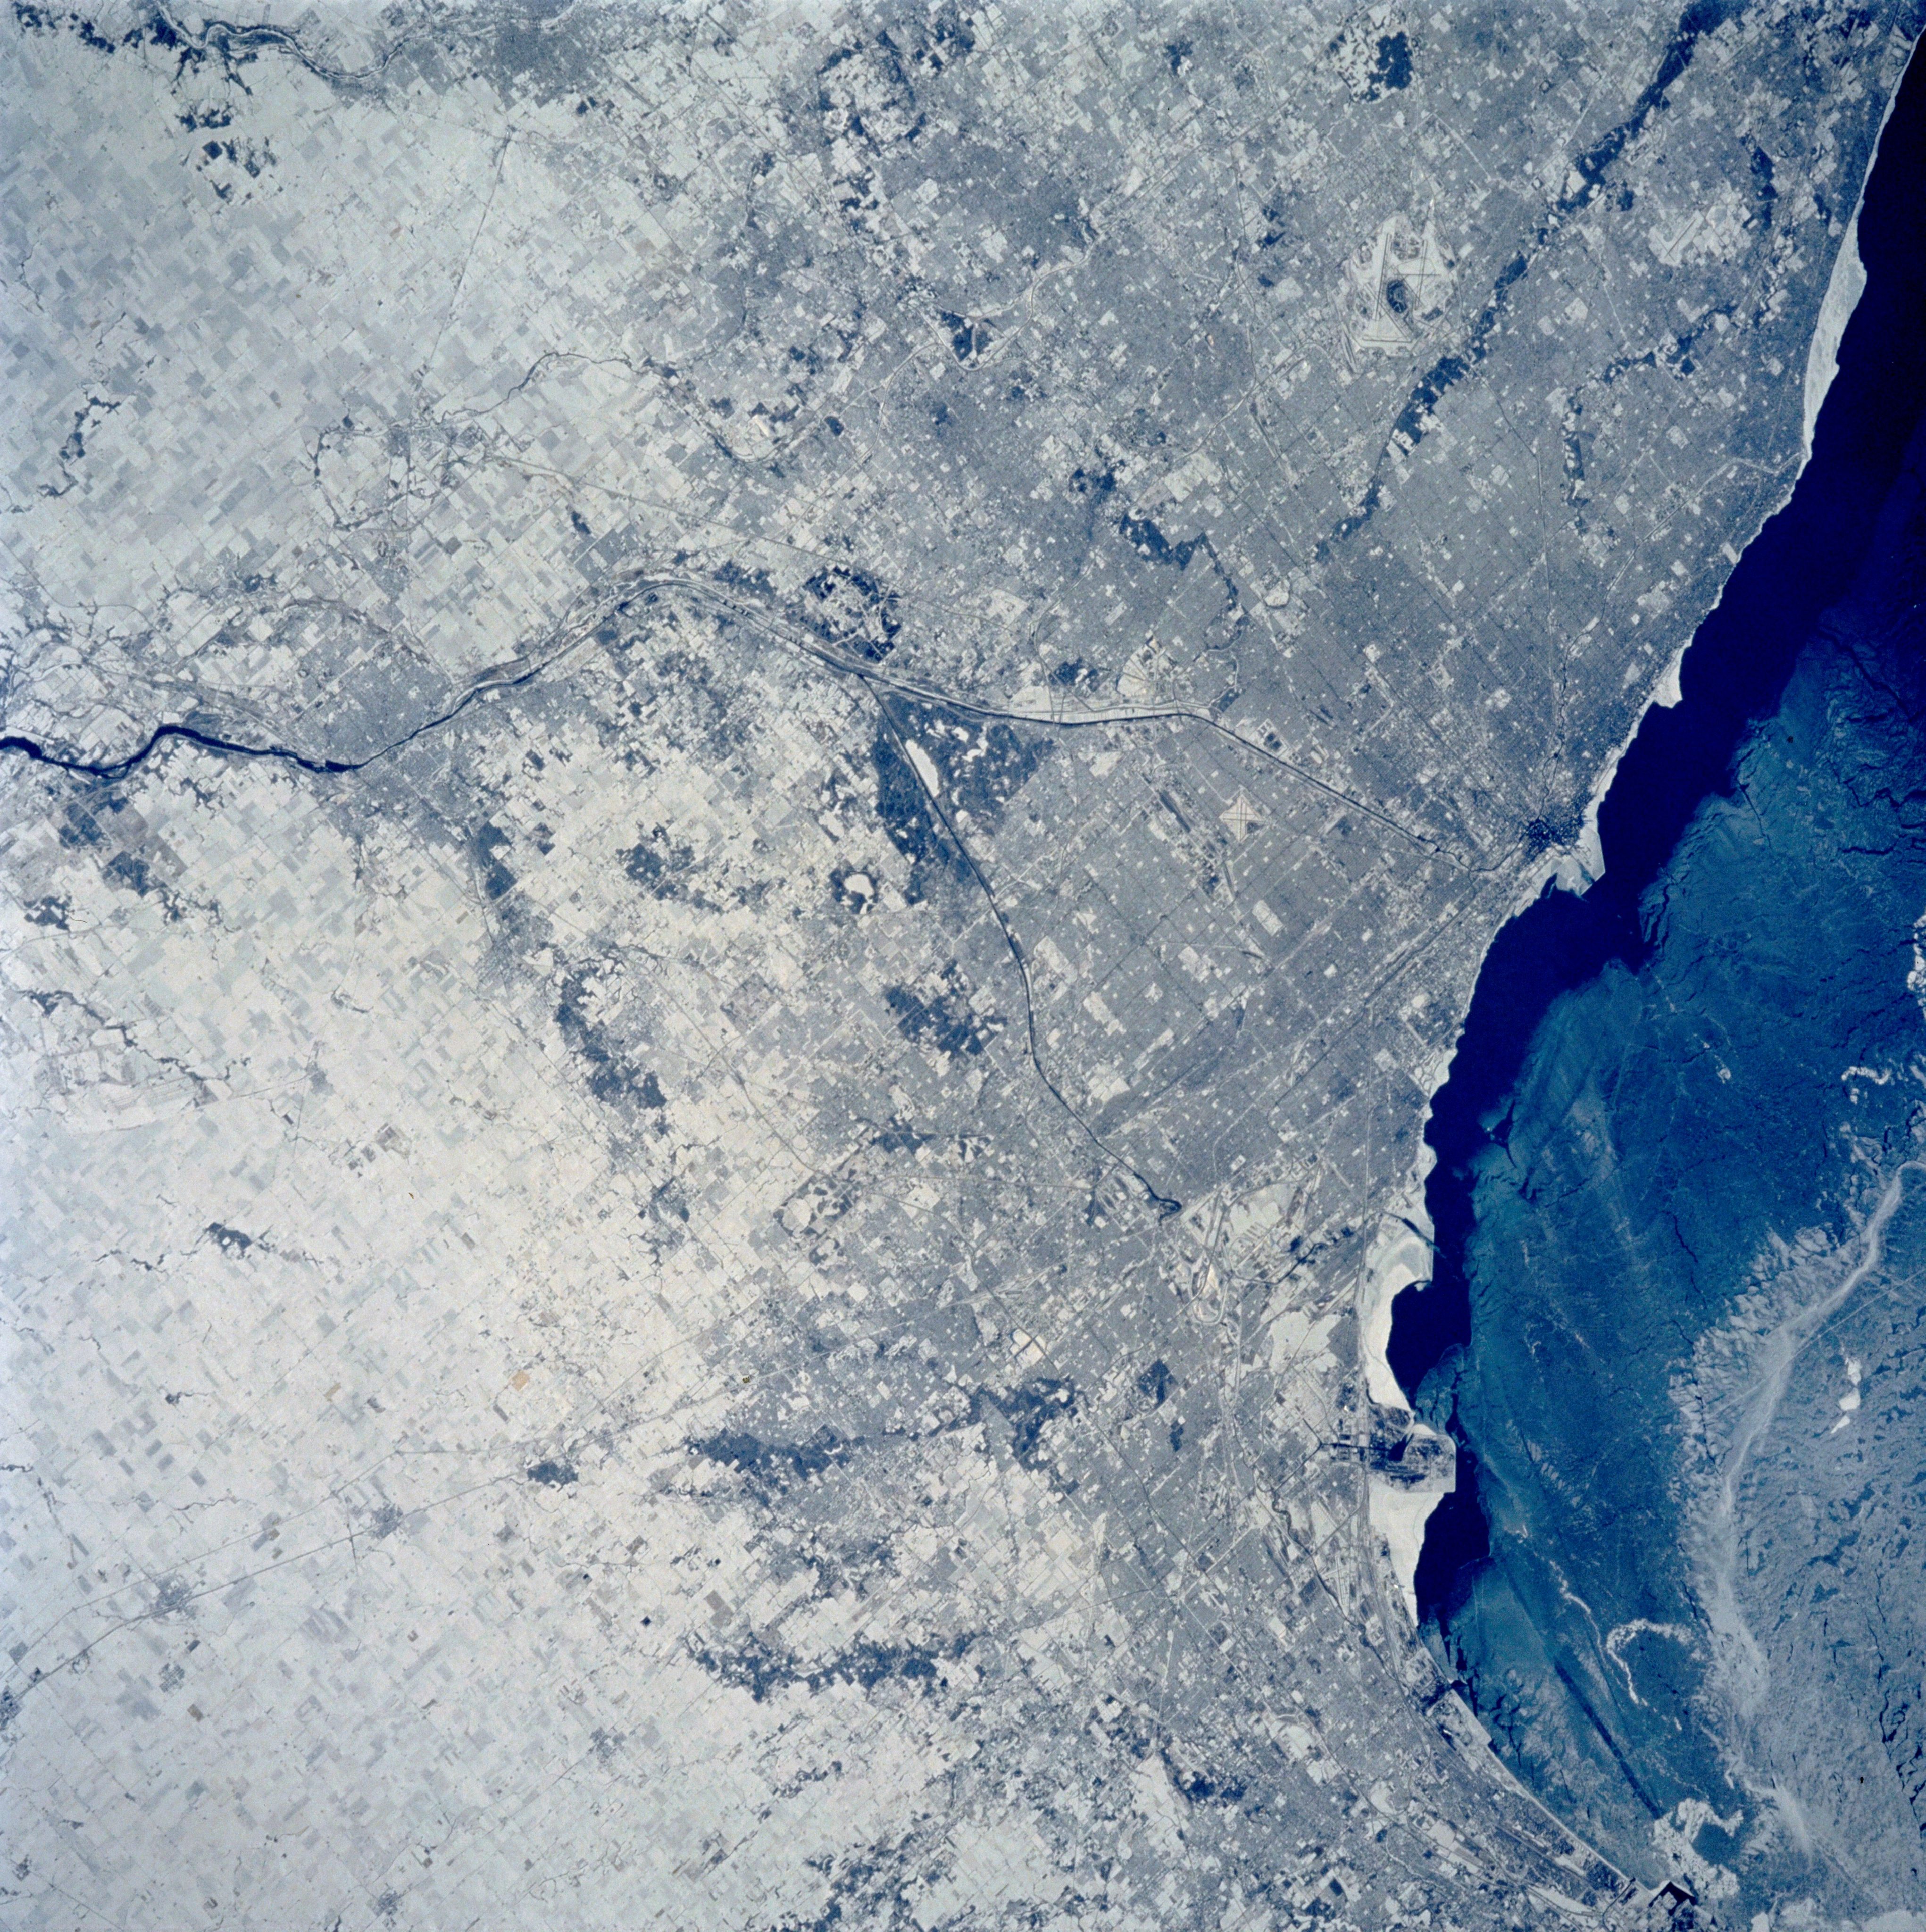 STS-60 Earth observation photographs of North American city Chicago